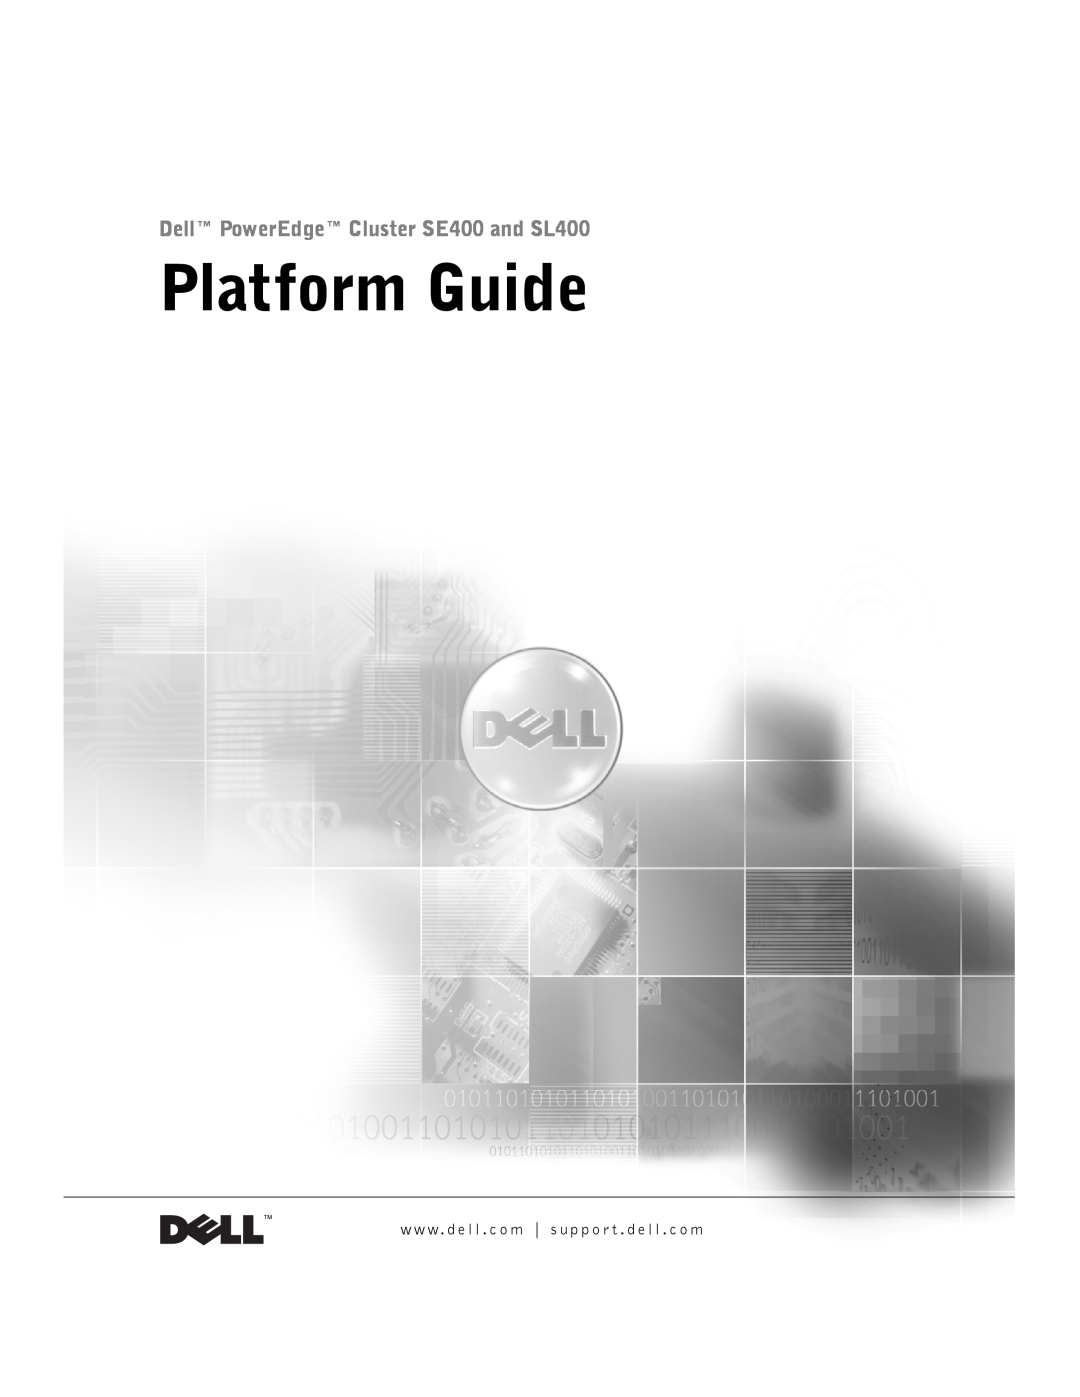 Dell manual Platform Guide, Dell PowerEdge Cluster SE400 and SL400 